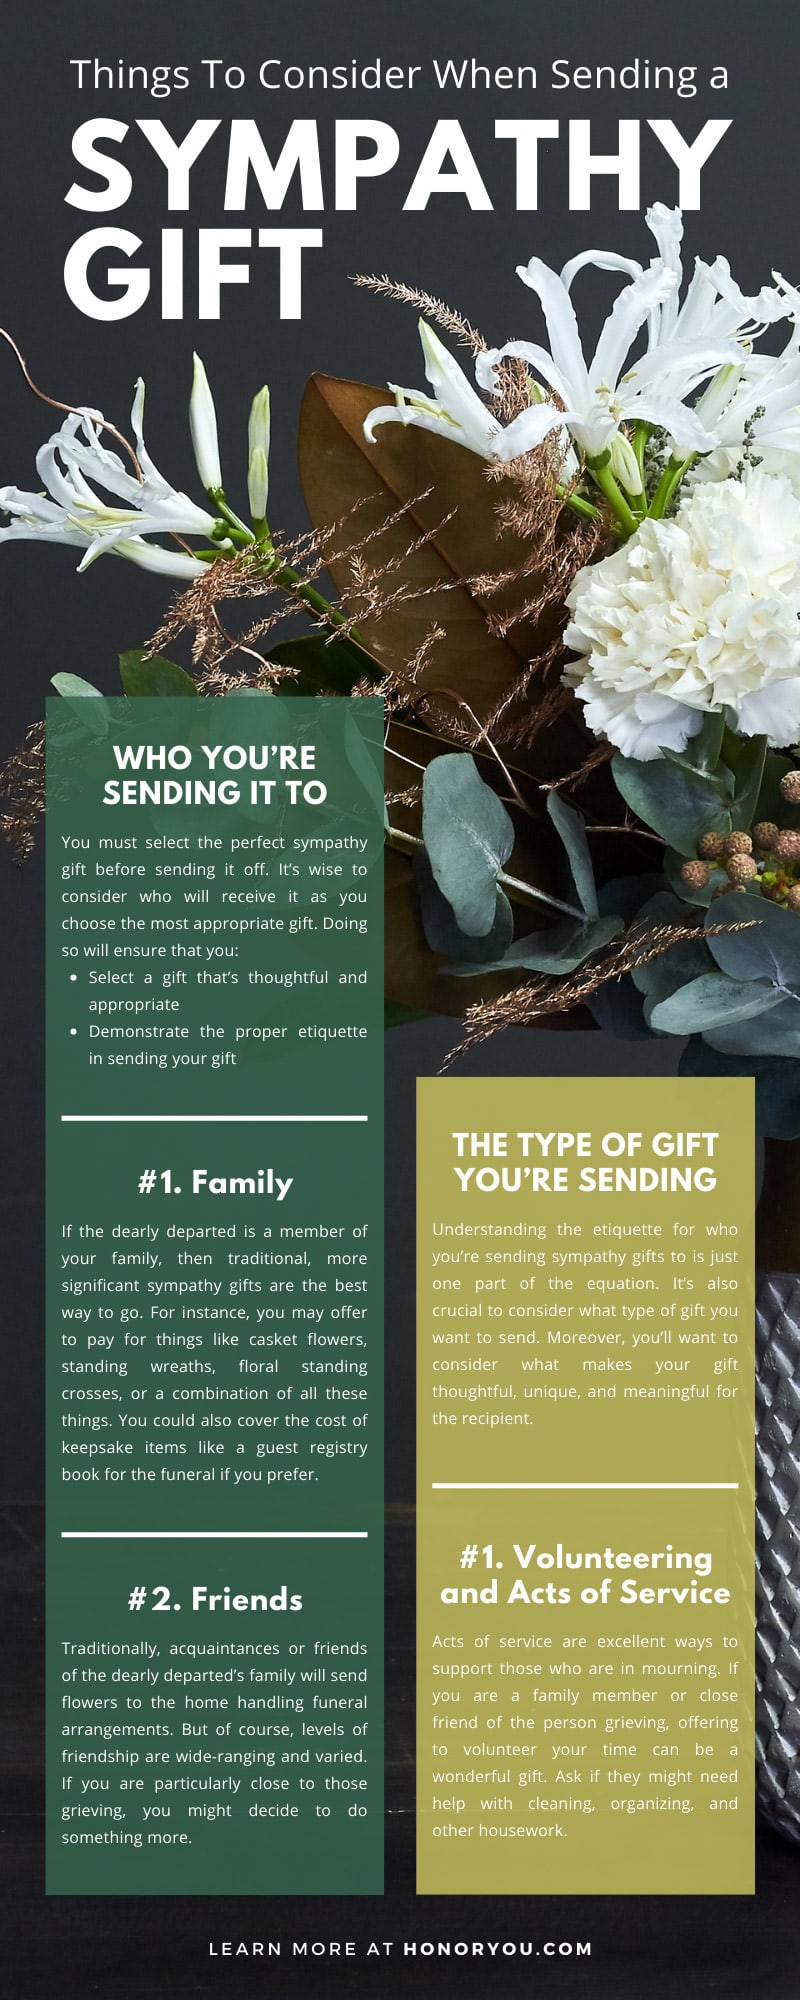 Things To Consider When Sending a Sympathy Gift
